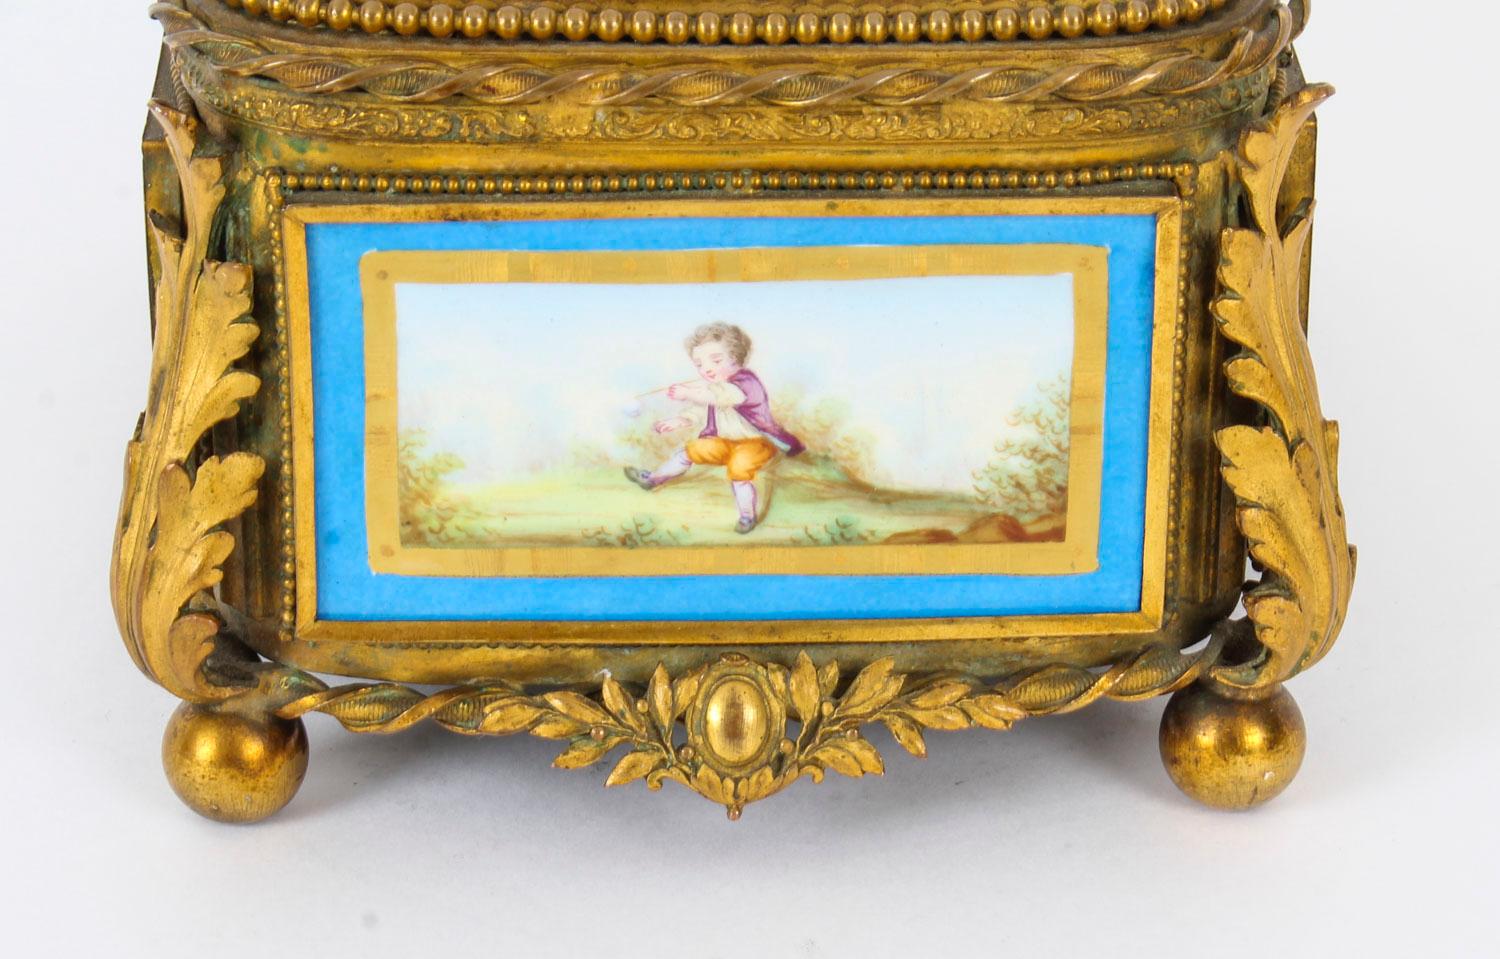 Antique French Sevres Porcelain and Ormolu Jewellery Casket 19th Century  For Sale 2